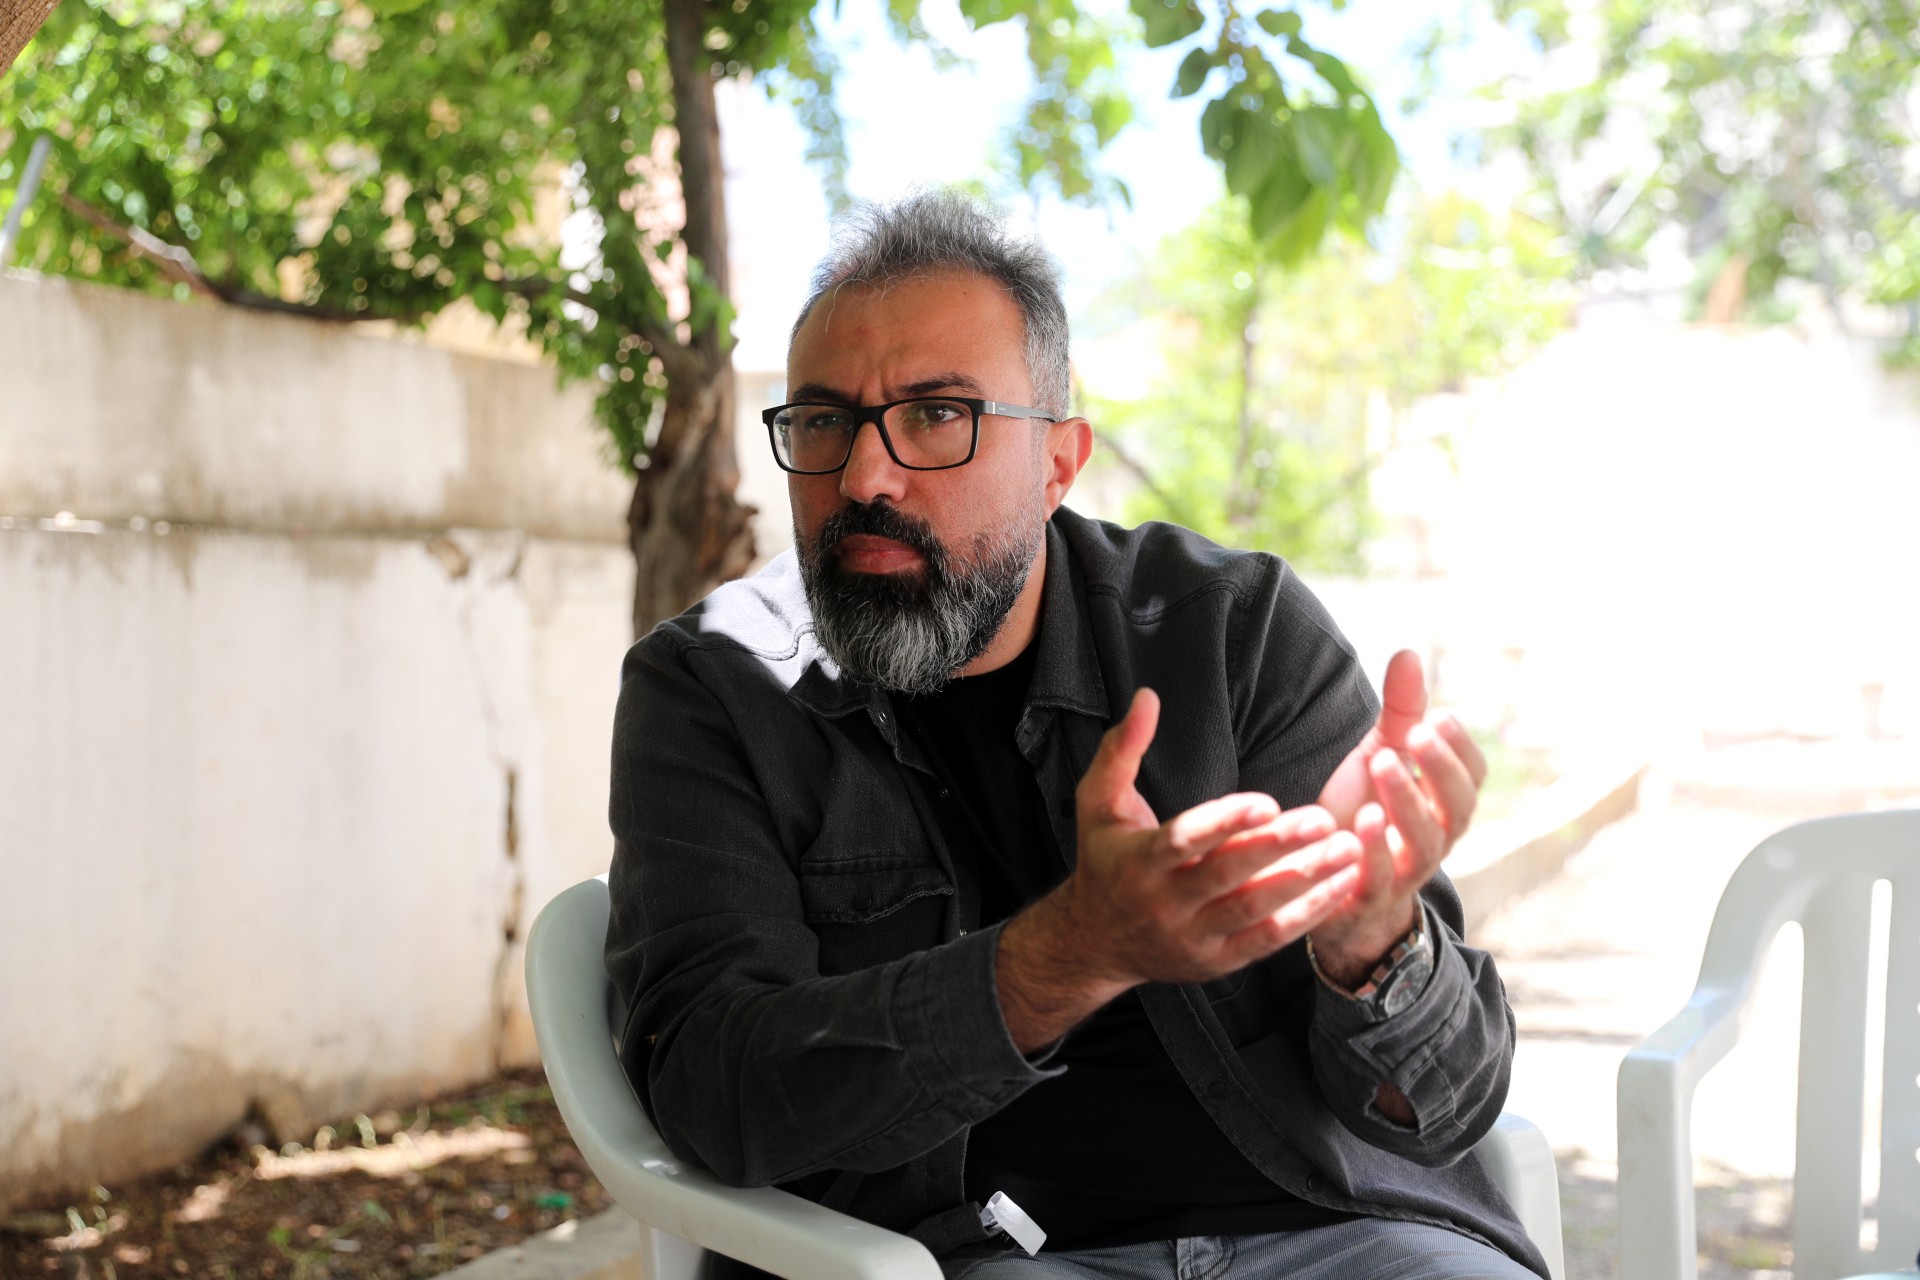 Ayman Mroueh said independents are struggling to get their message across to voters because of exorbitant fees for appearing on TV (MEE/Hassan Shaaban)